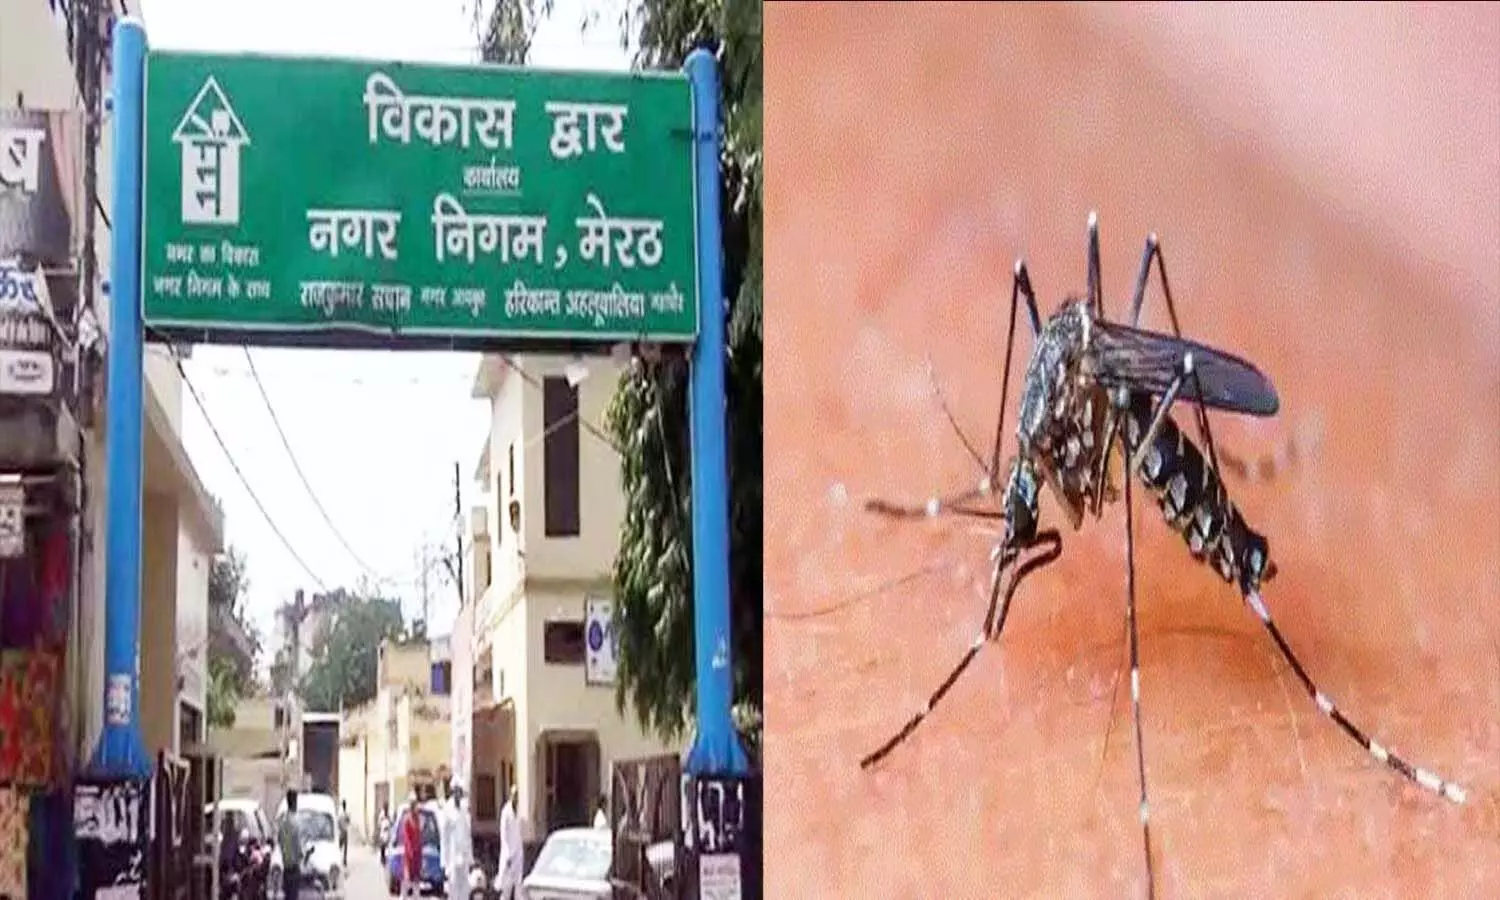 Meerut News: Dengue, which caused the most havoc in UP, was sluggish in Meerut, today only one patient was found